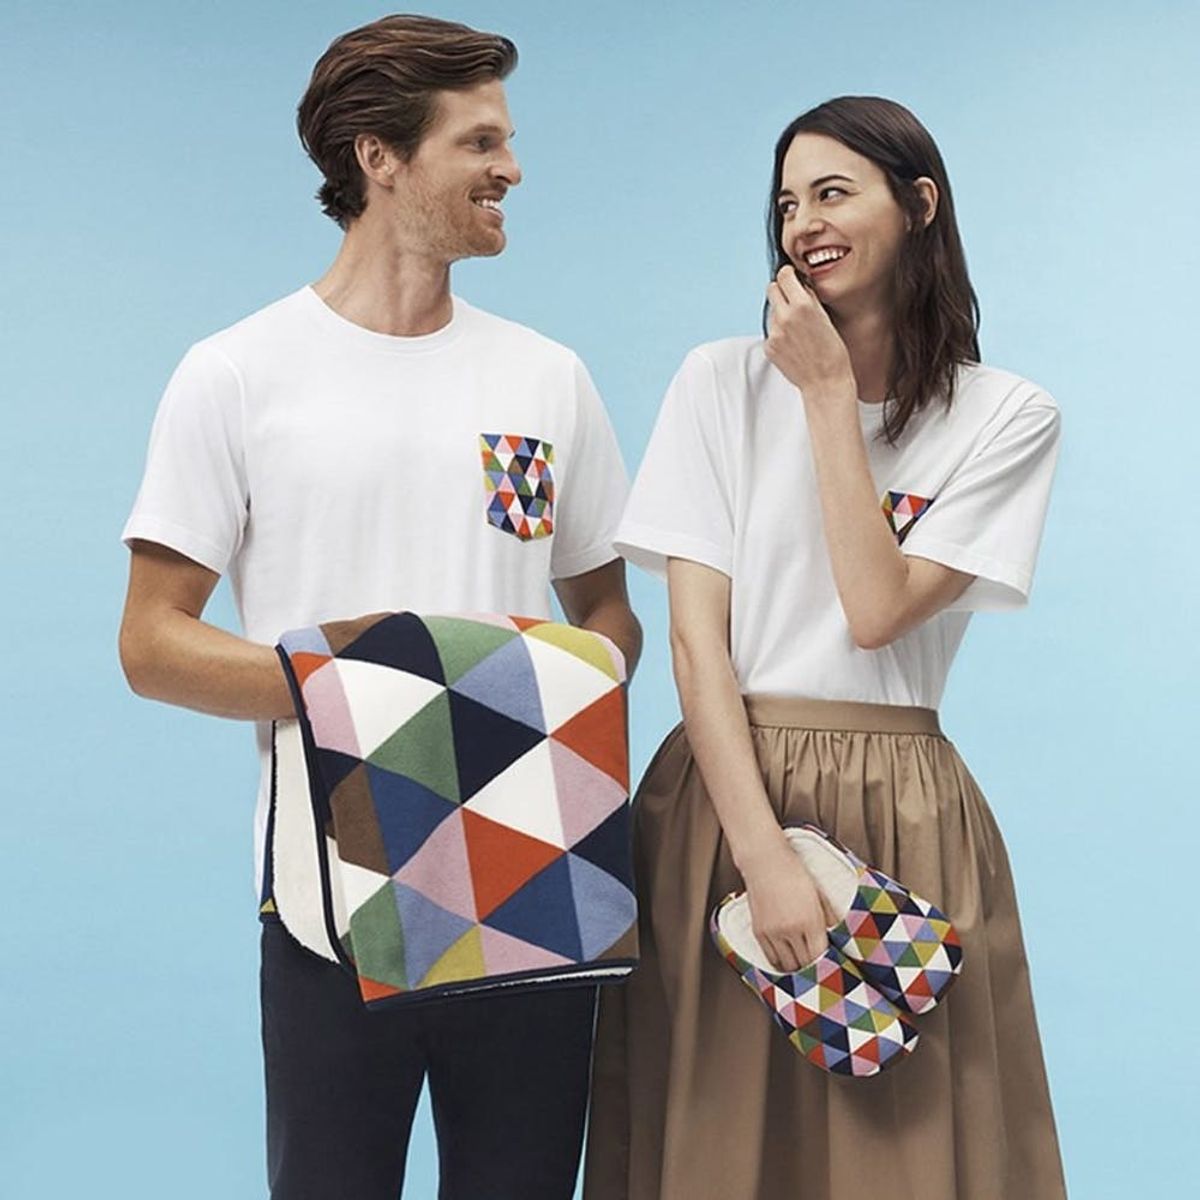 5 Picks You Need from the Uniqlo x Eames (!) Collab